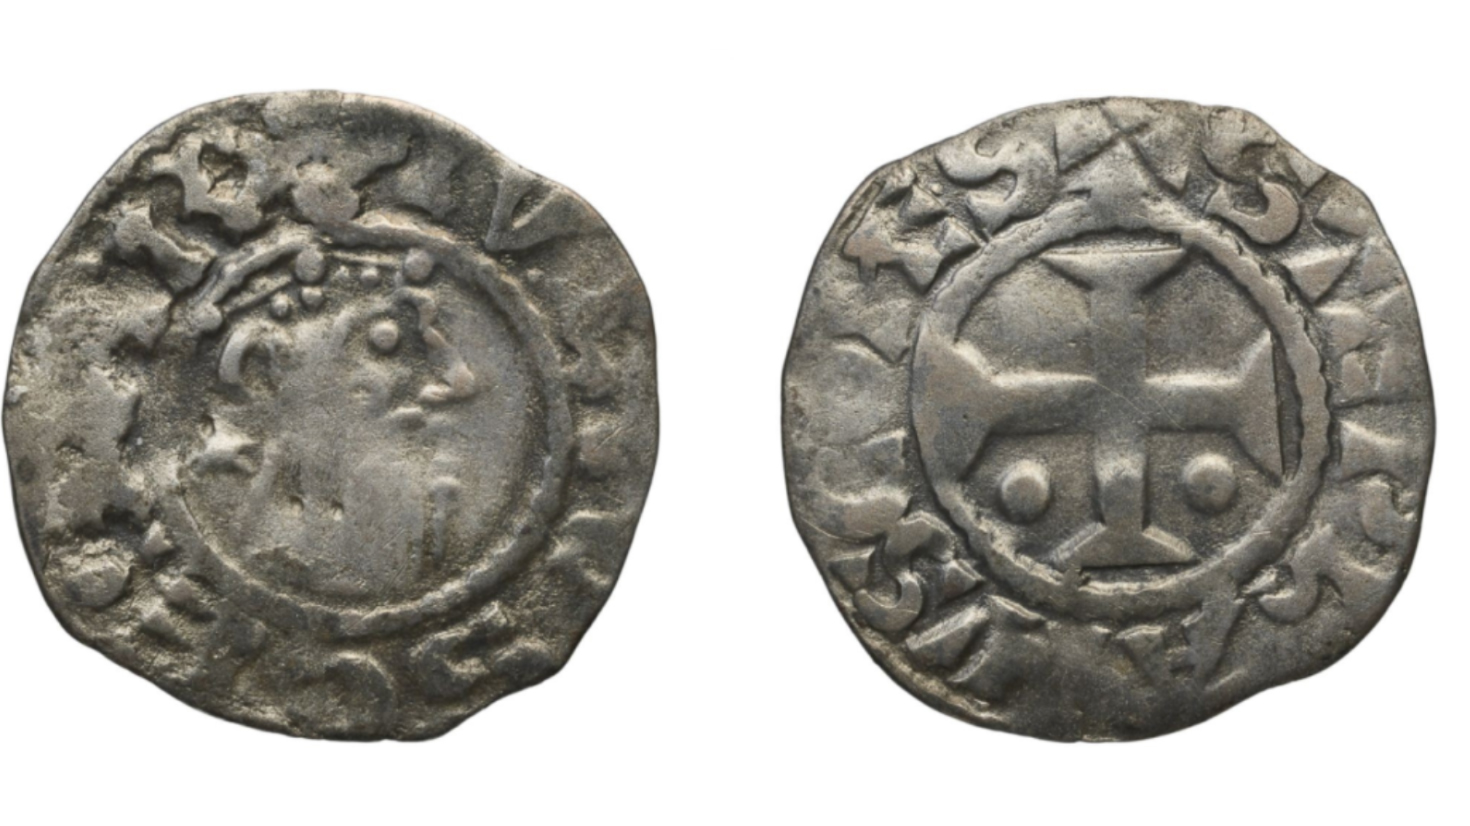 Reading medieval coins